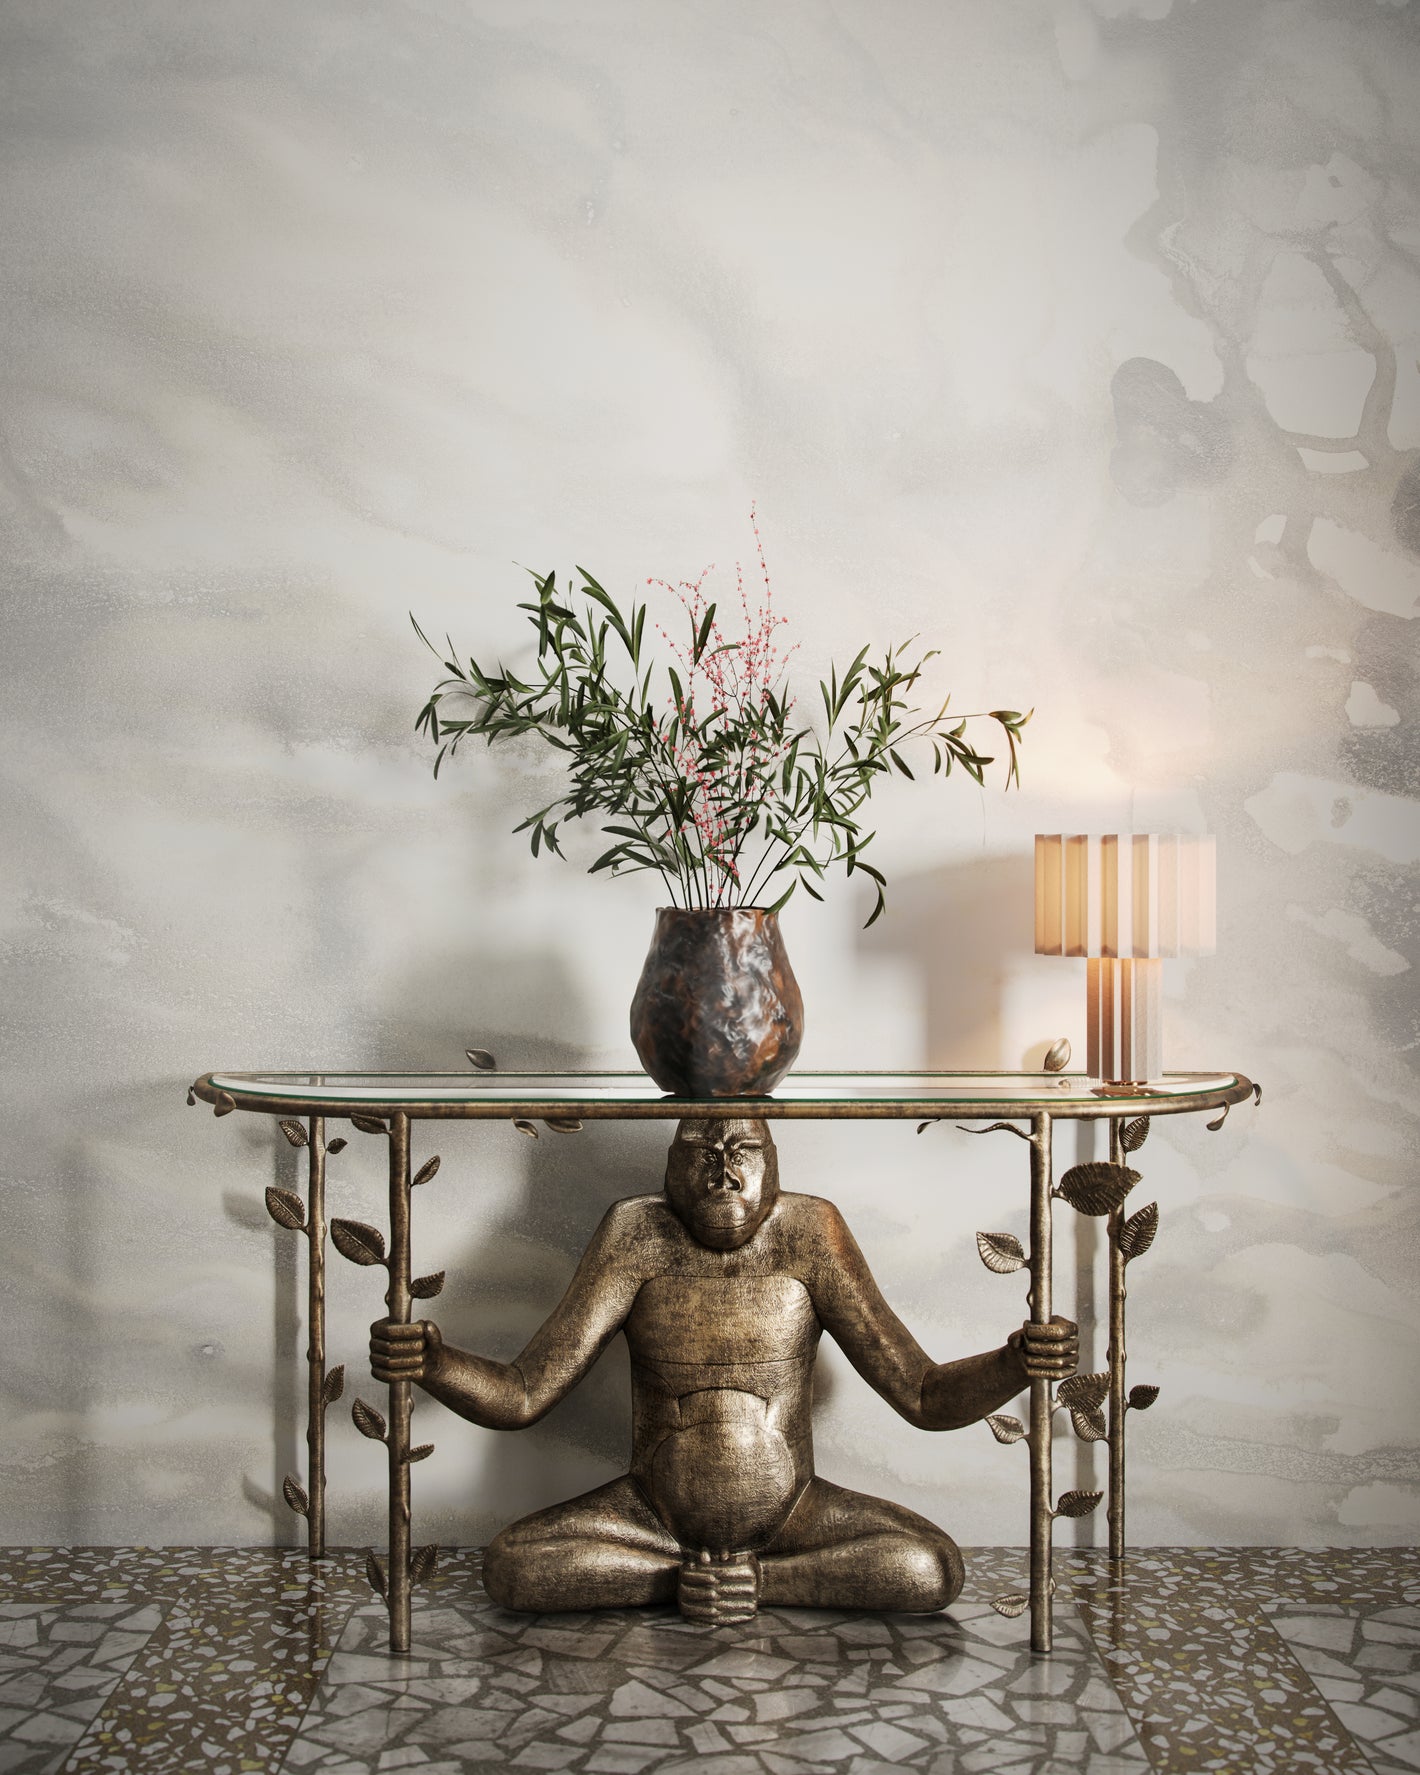 An intricate entry table with a built in statue in the middle in a room with the delta wallpaper in sand.